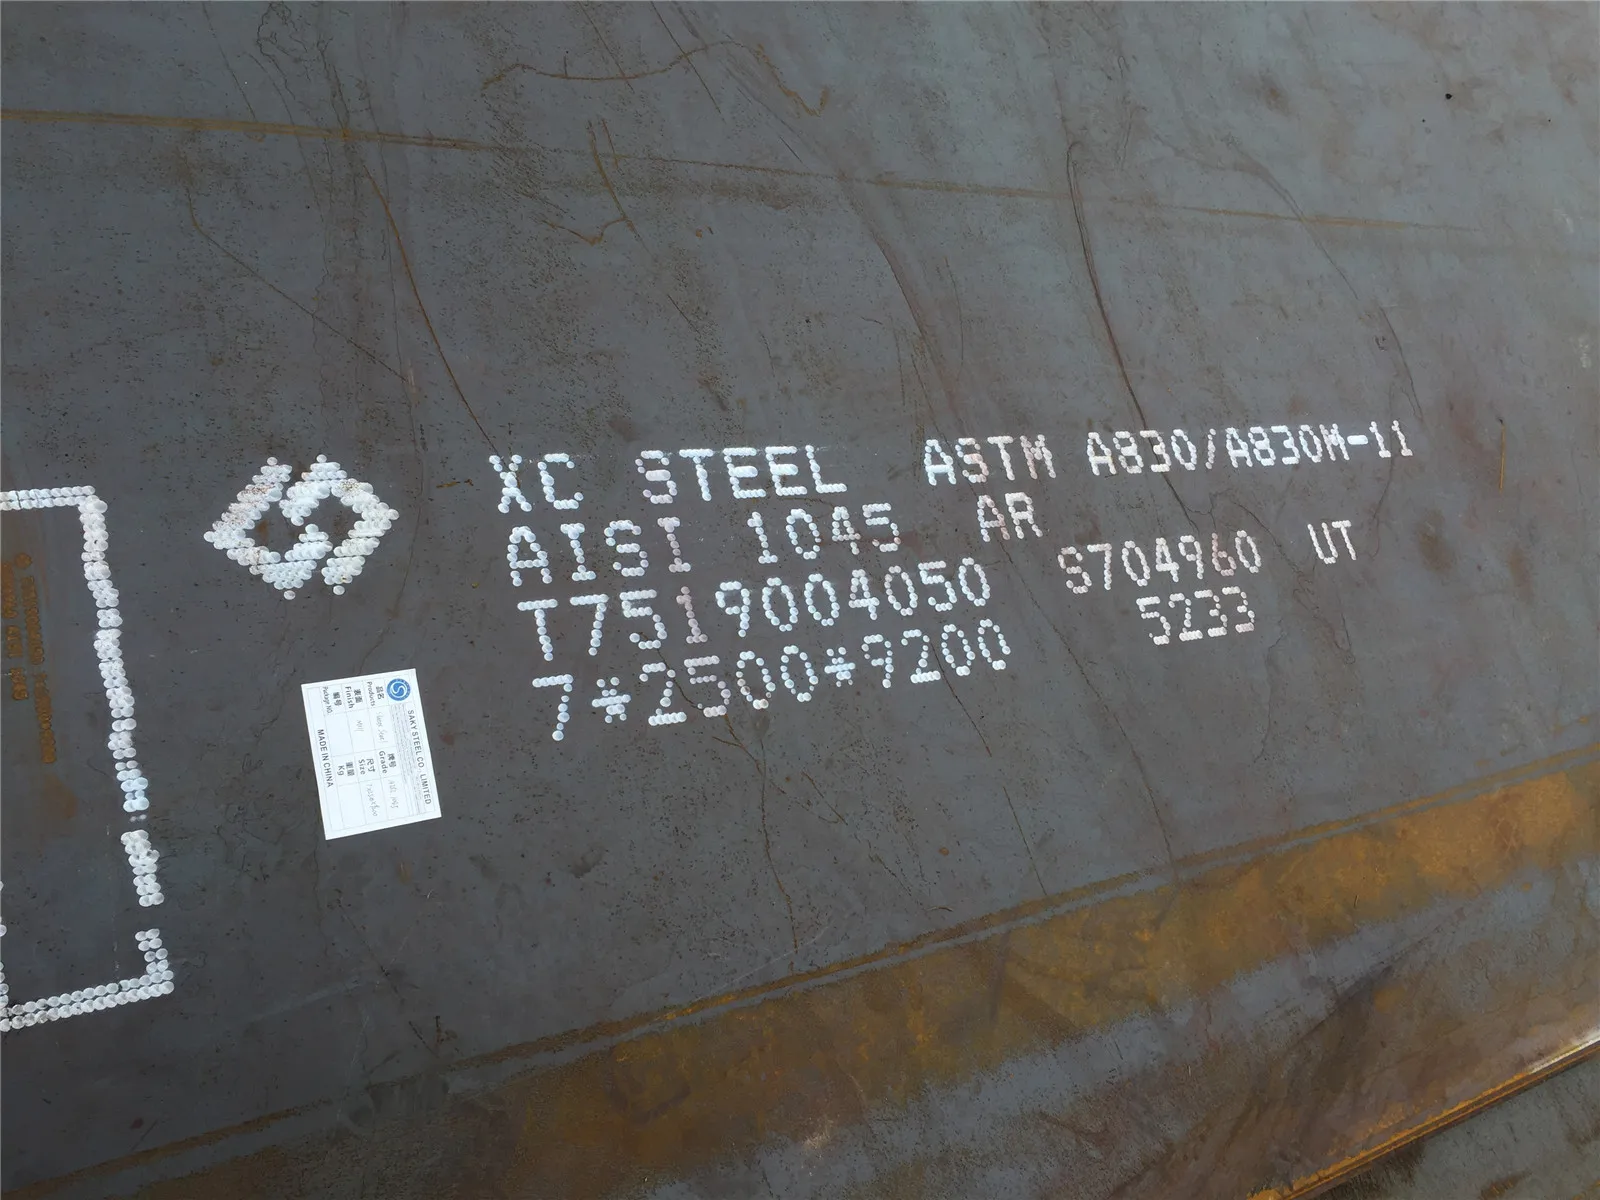 1095 And 15n Carbon Steel Plate Sae 1015 Buy 1095 And 15n Carbon Steel Plate Corten Steel Plate Carbon Steel Plate Sae 1015 Product On Alibaba Com